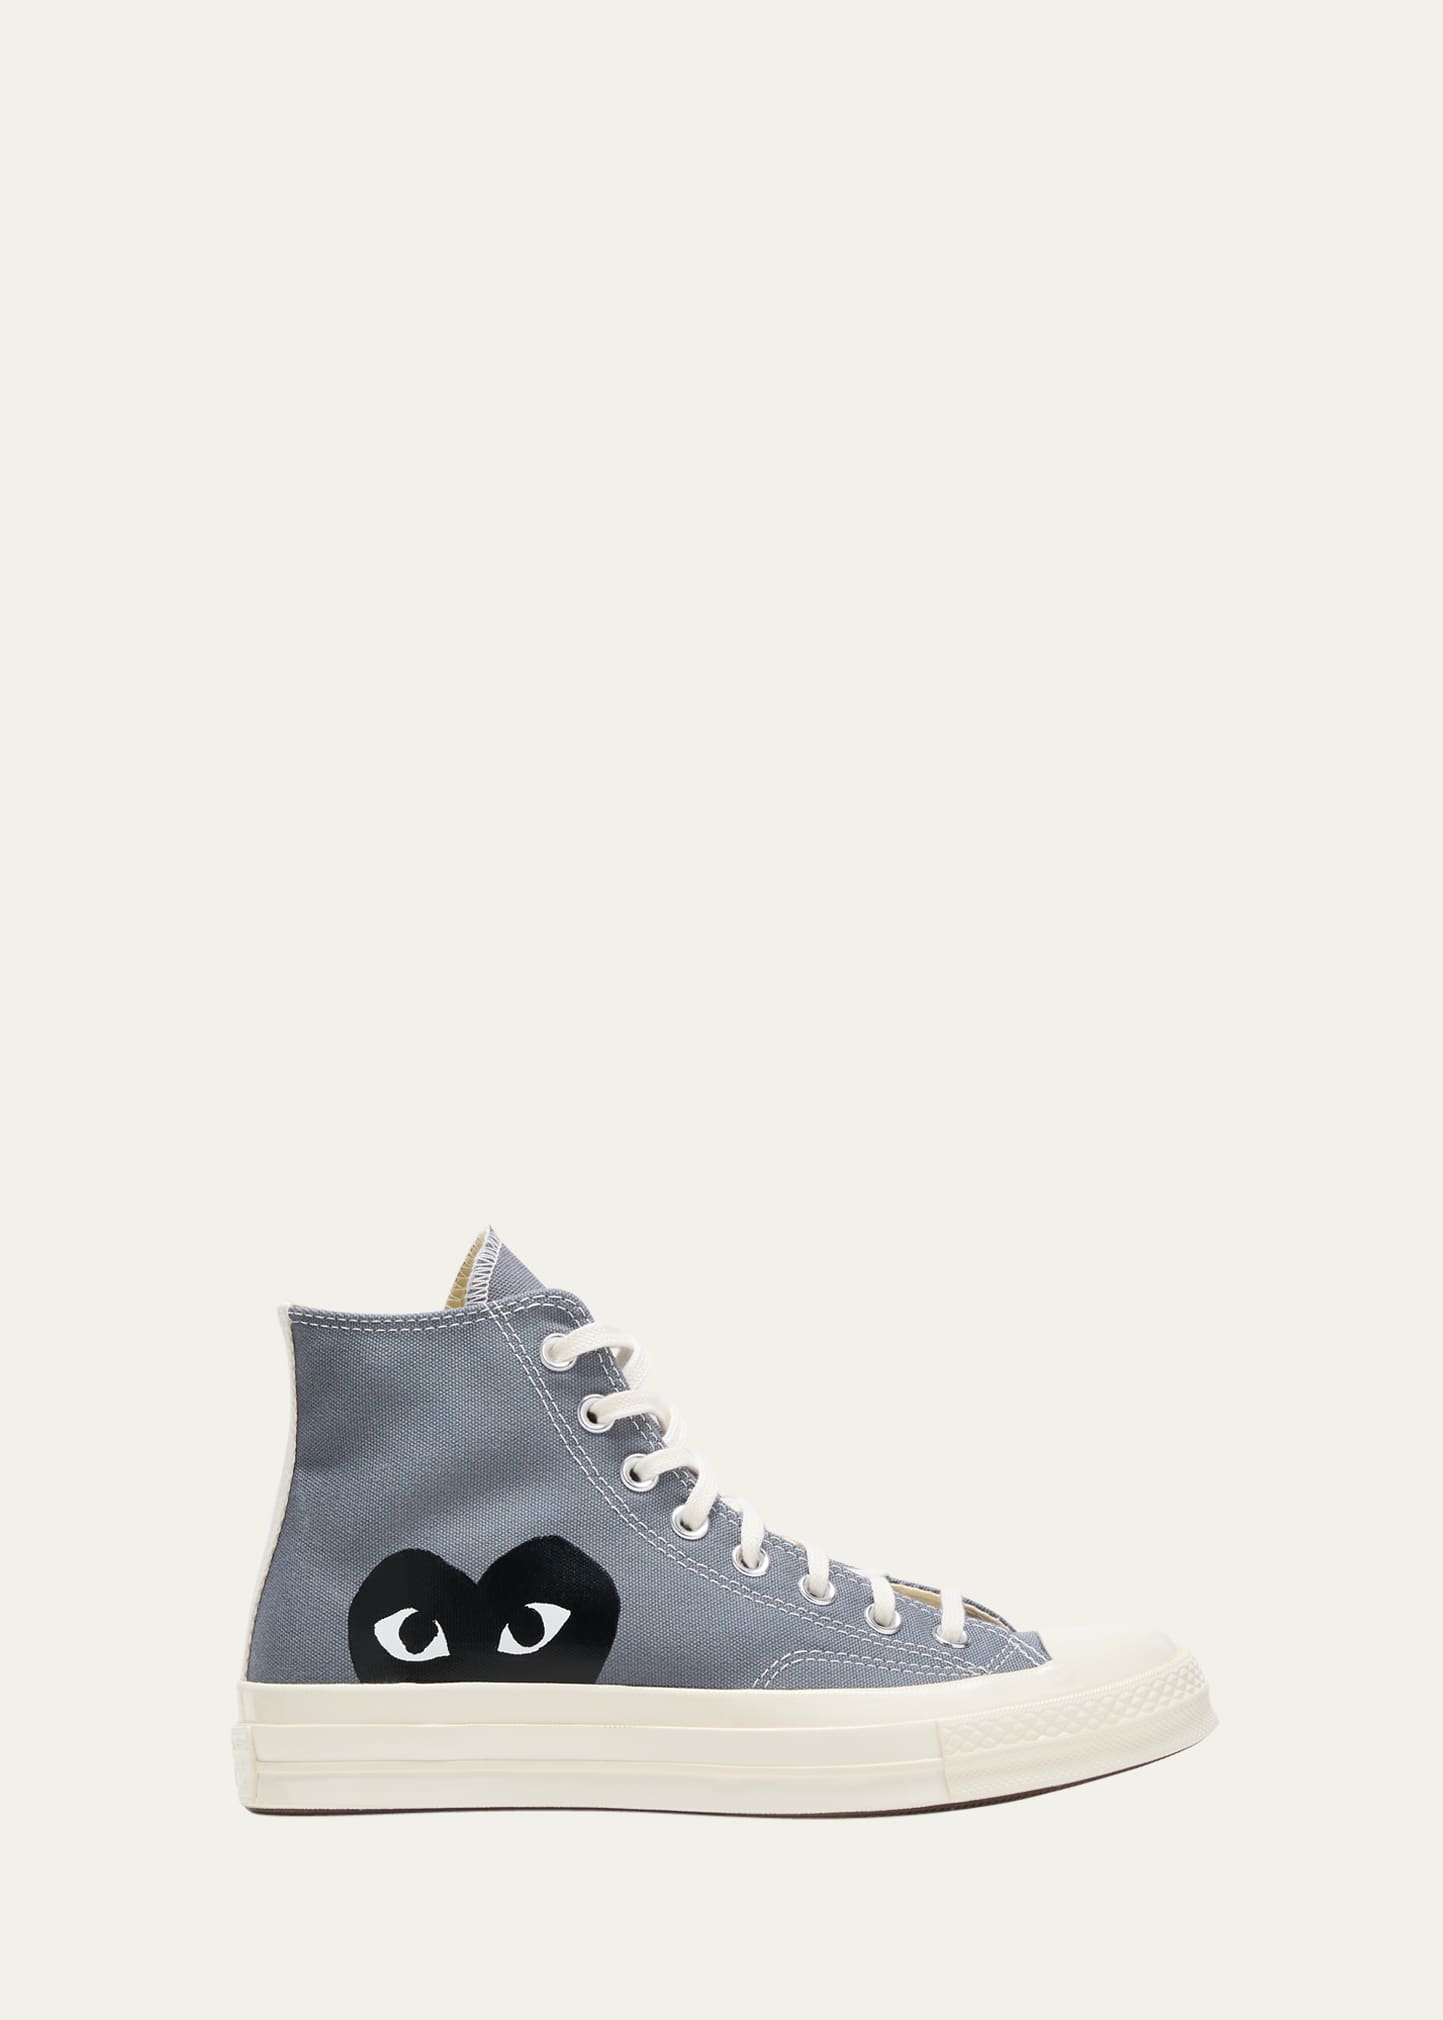 Cdg Play X Converse Chuck Taylor Canvas High-top Sneakers In Grey